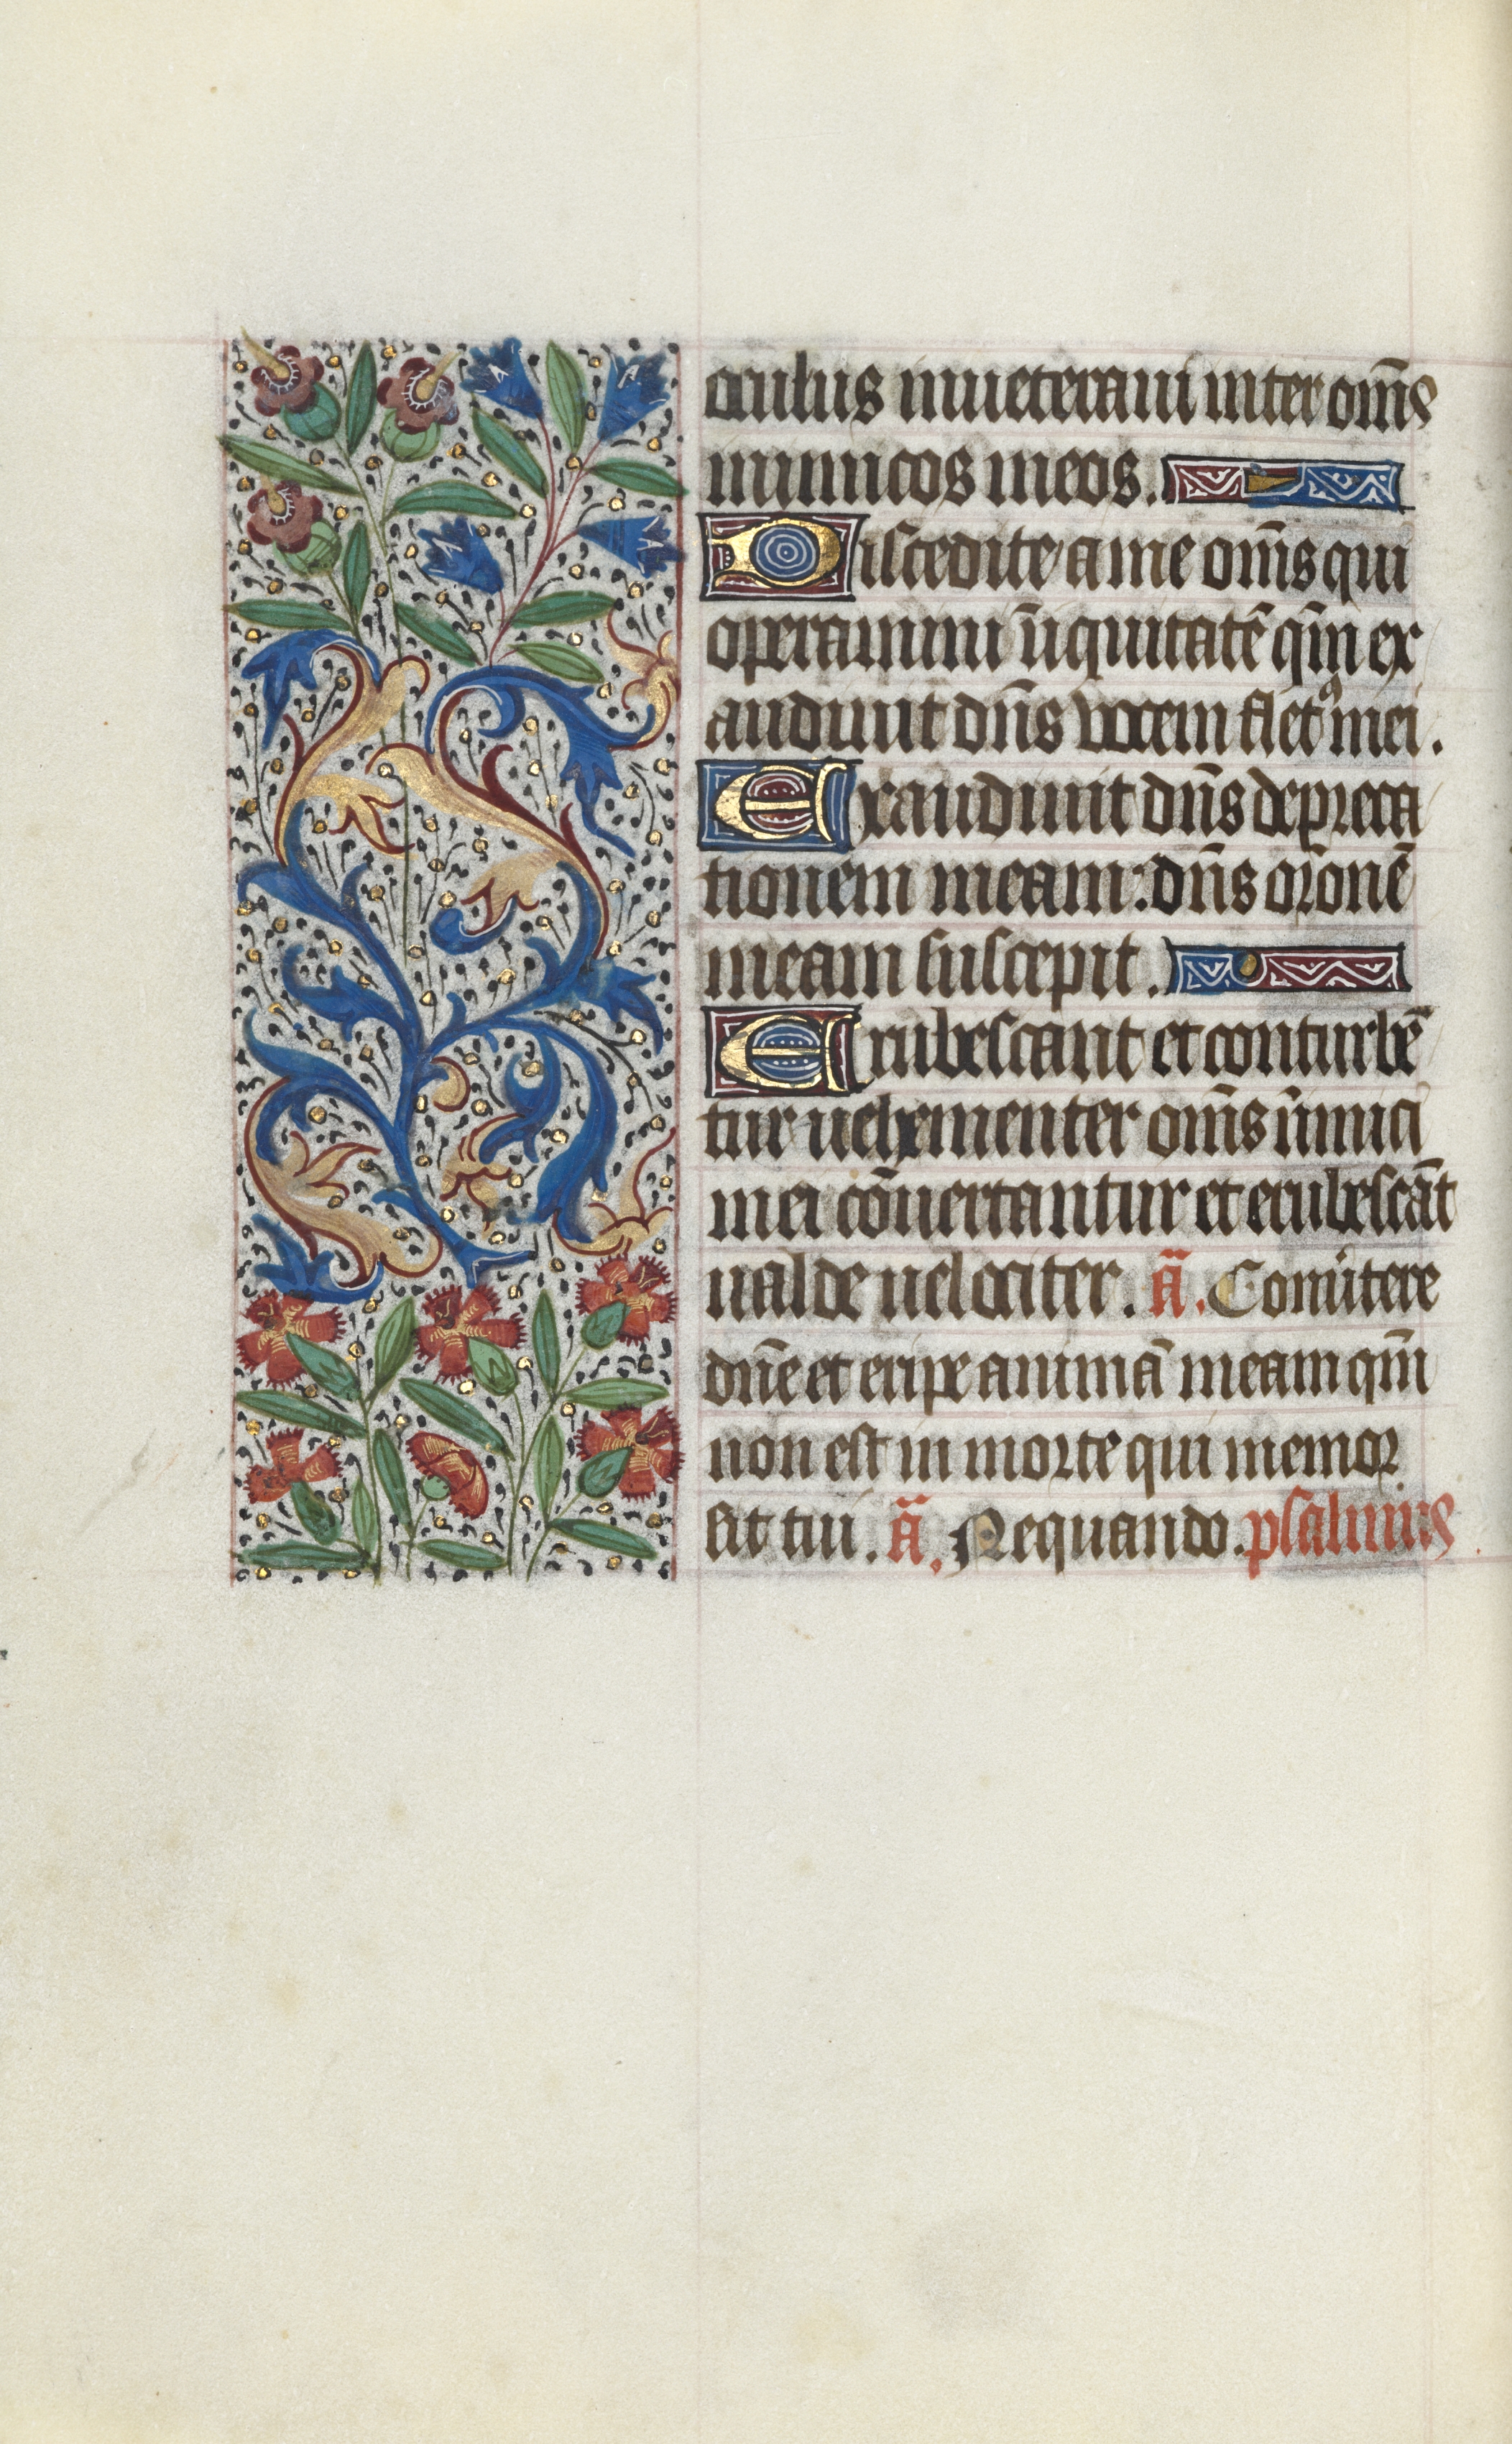 Book of Hours (Use of Rouen): fol. 112v